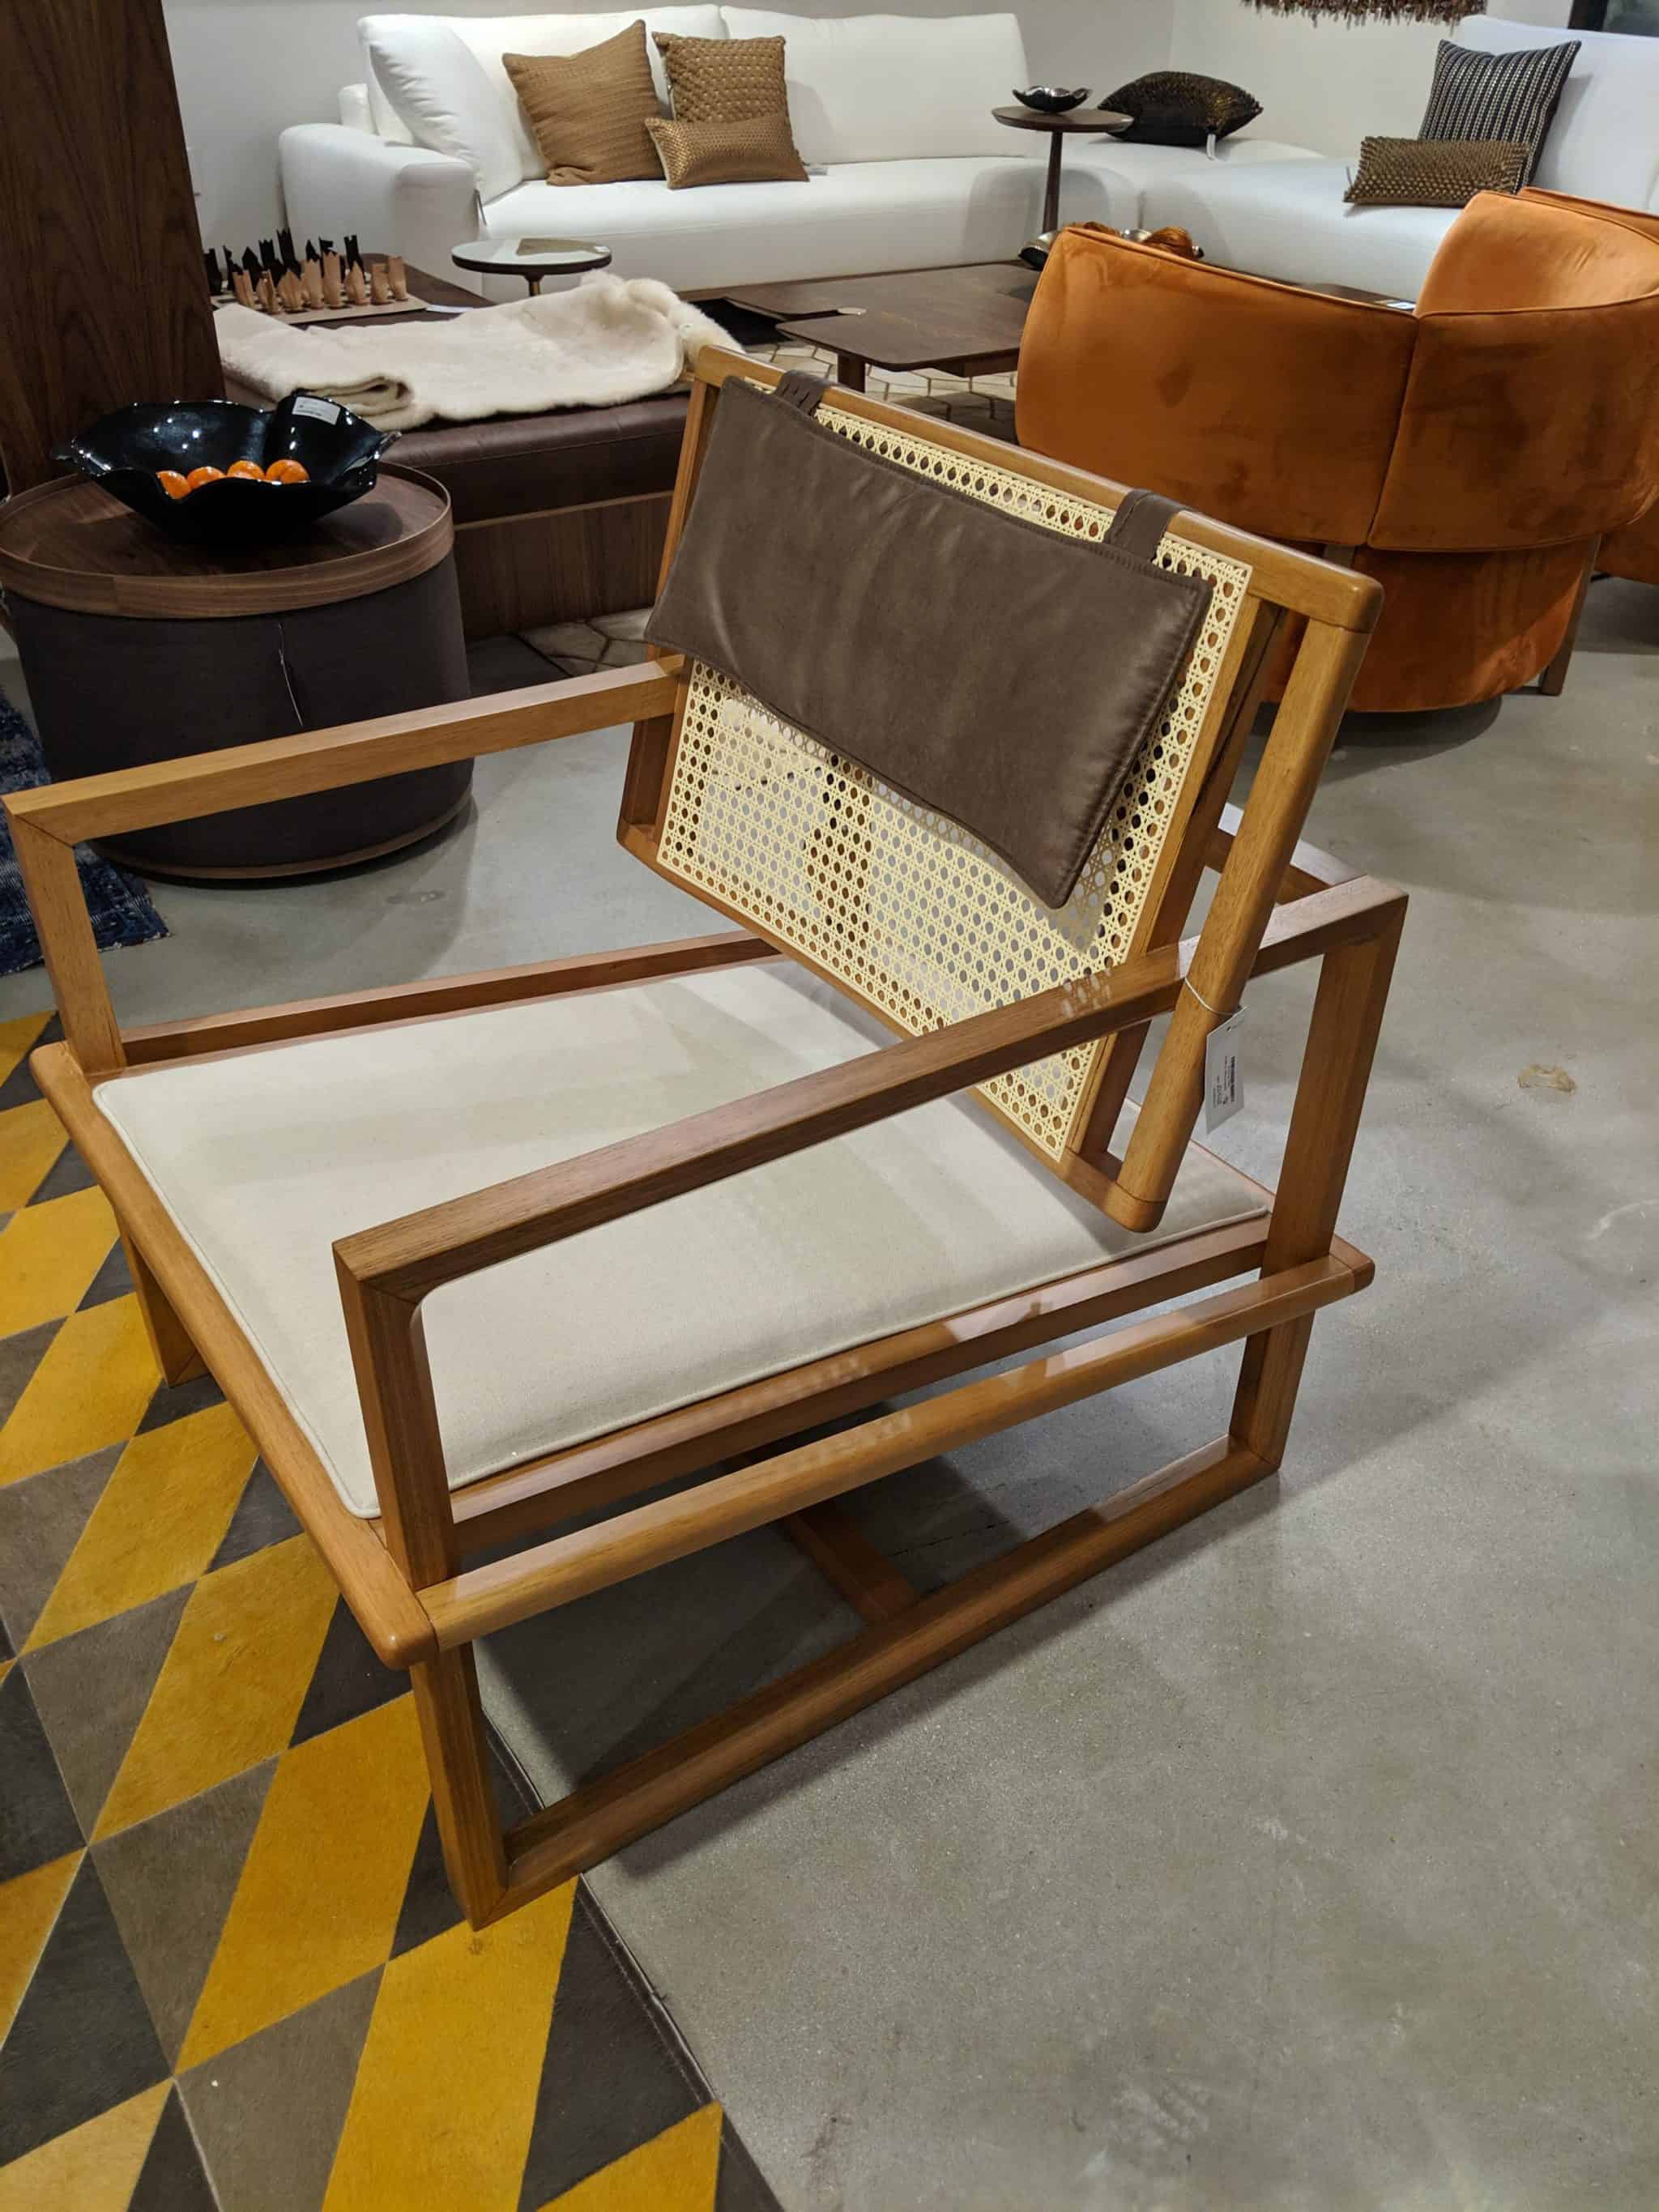 A chair featuring caning and leather straps at High Point Market 2019